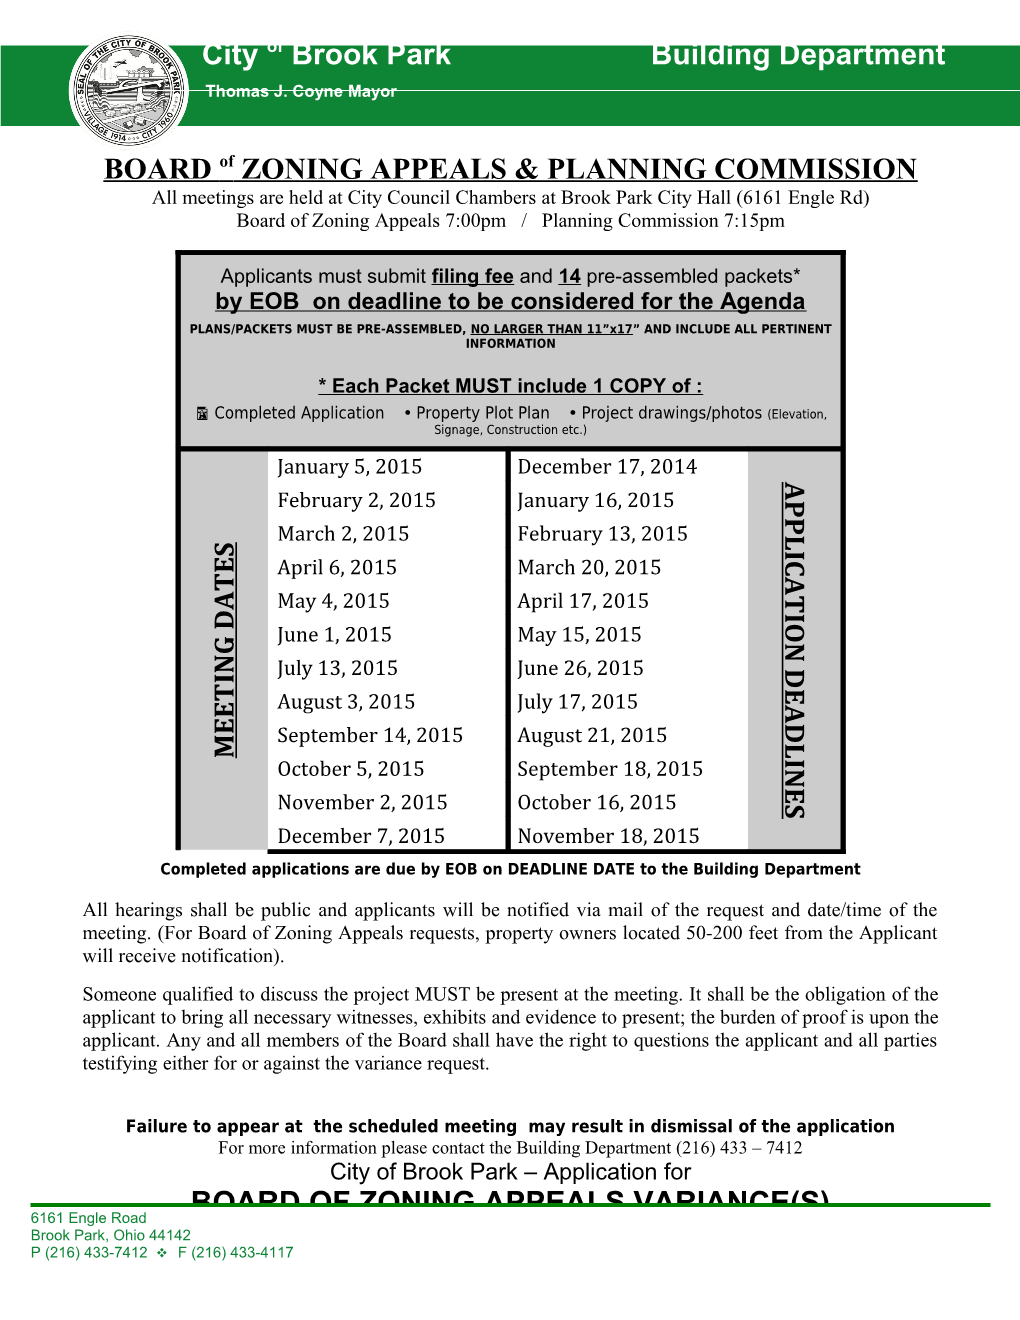 BOARD of ZONING APPEALS & PLANNING COMMISSION